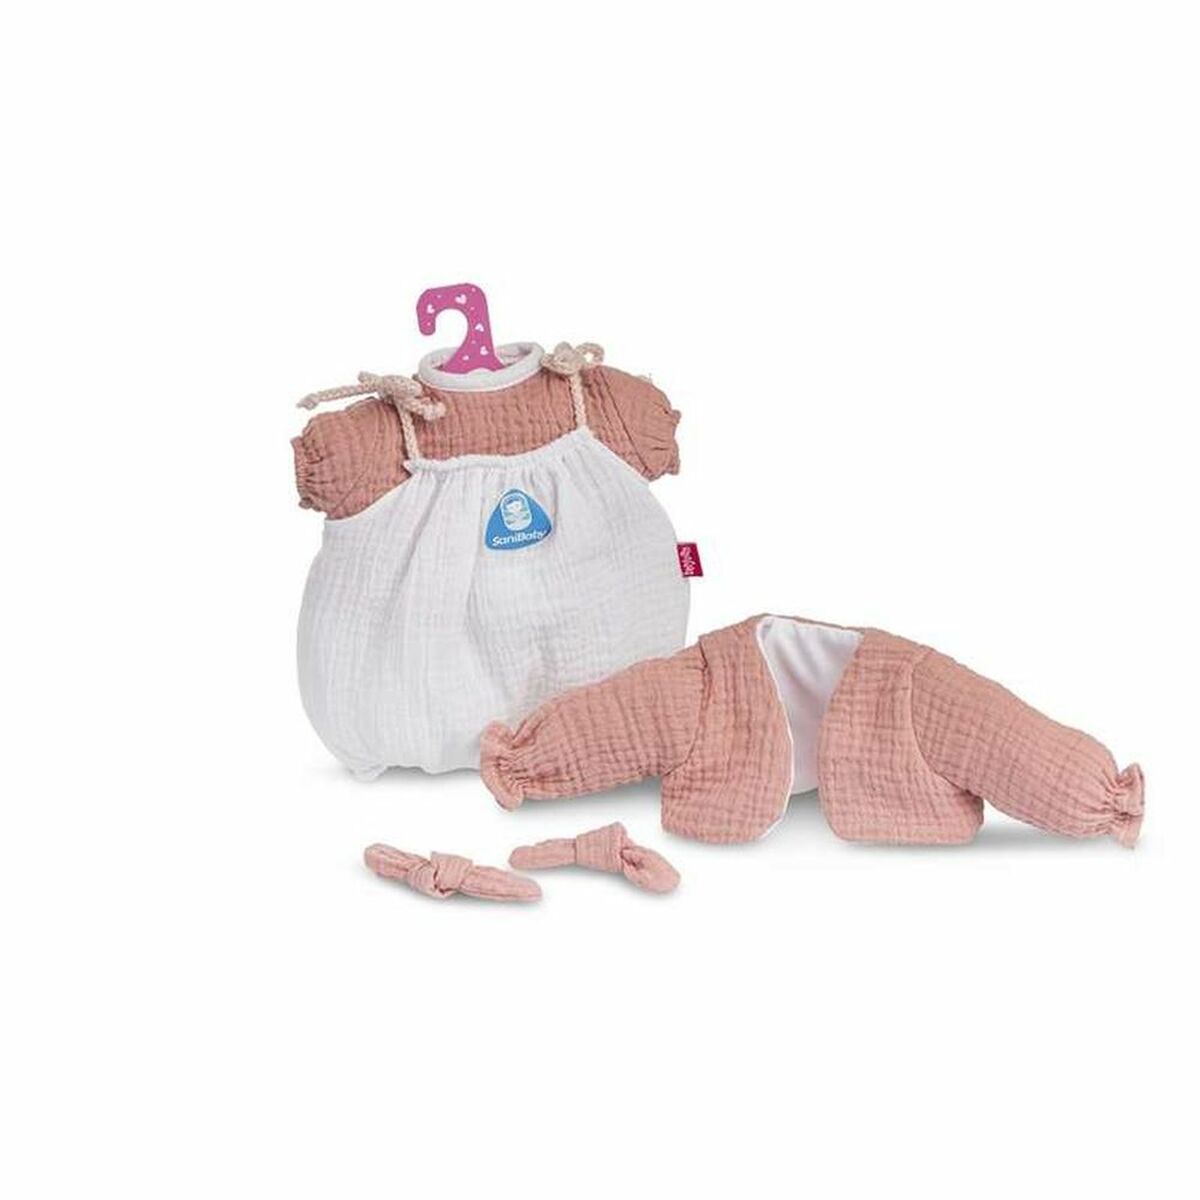 Doll's clothes Berjuan Sanibaby Pink (40 cm) - Little Baby Shop